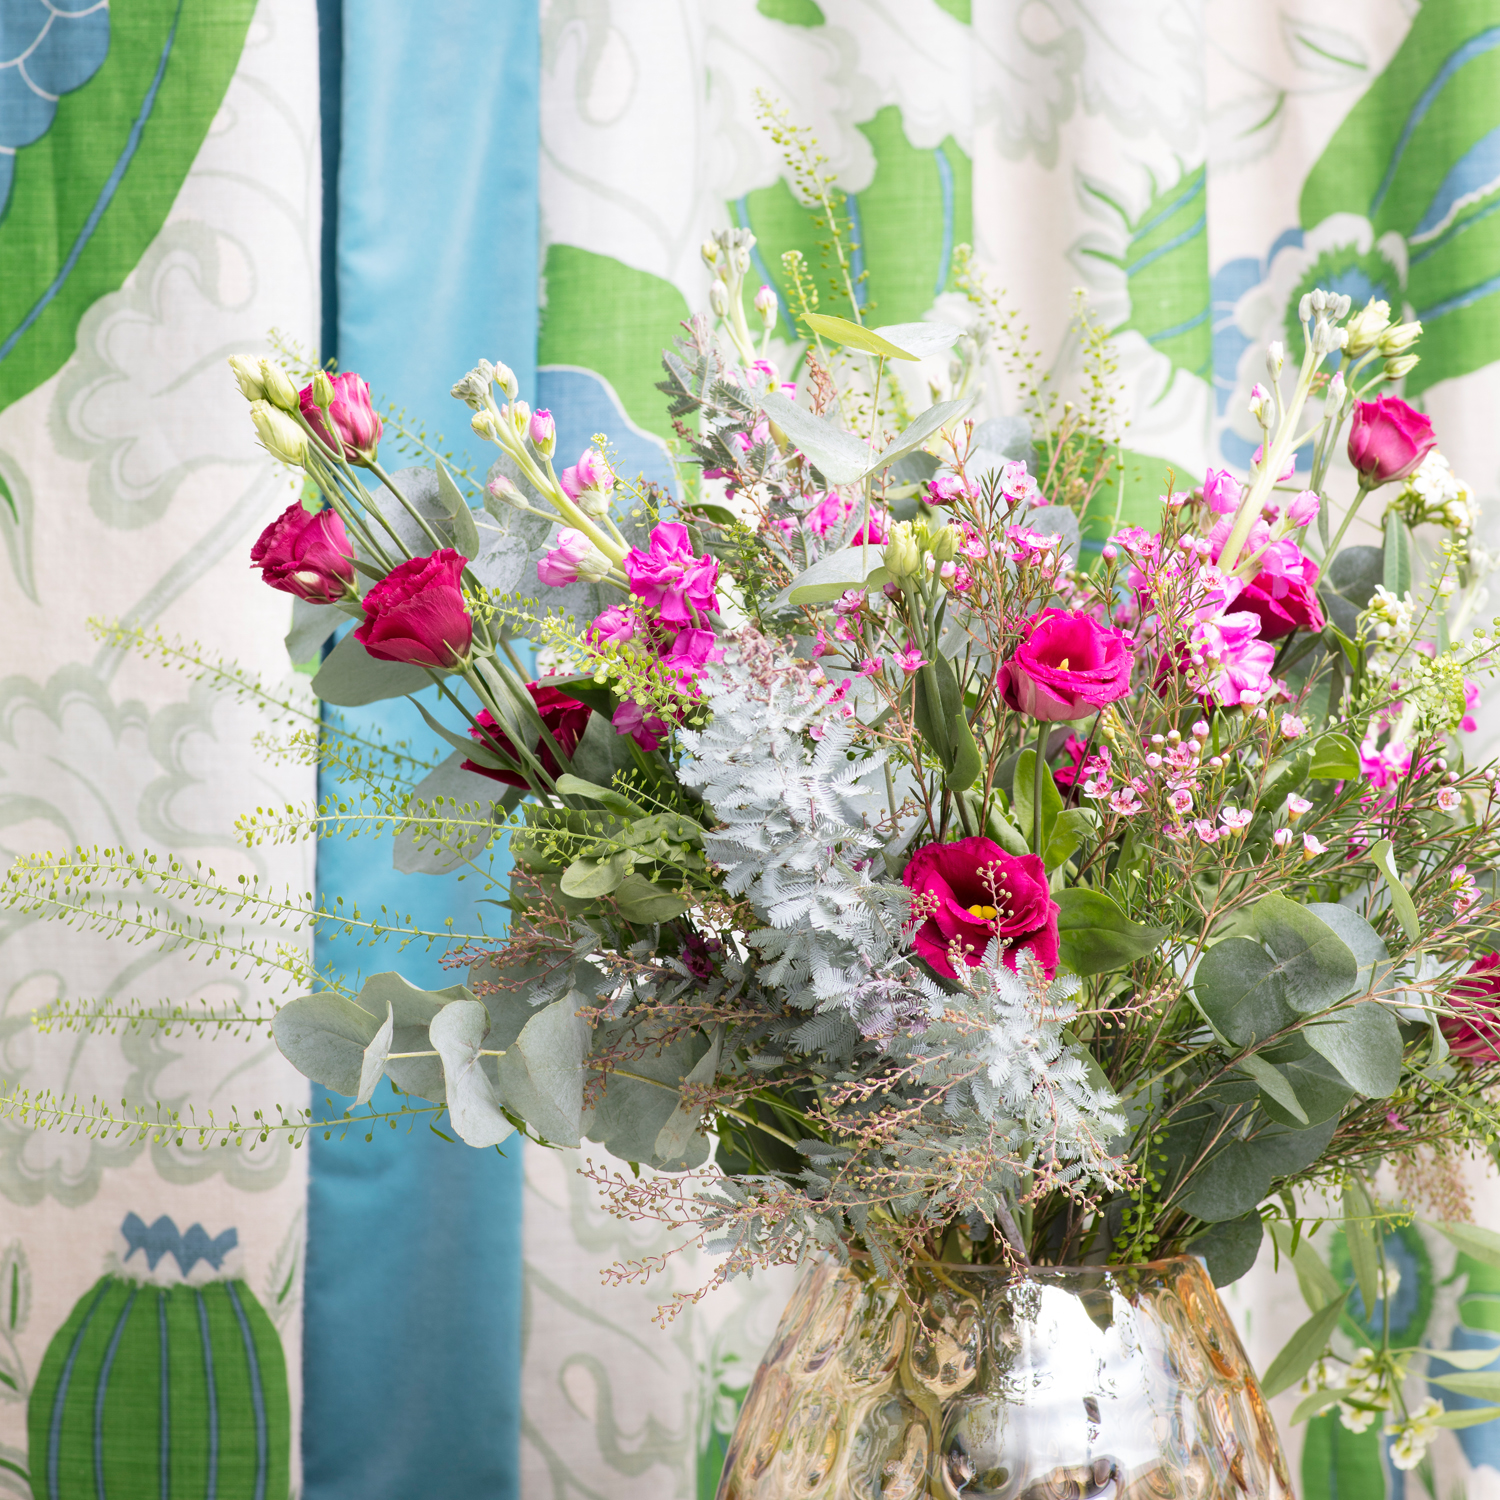 An arrangement in The Pink House den/Photo: Susie Lowe